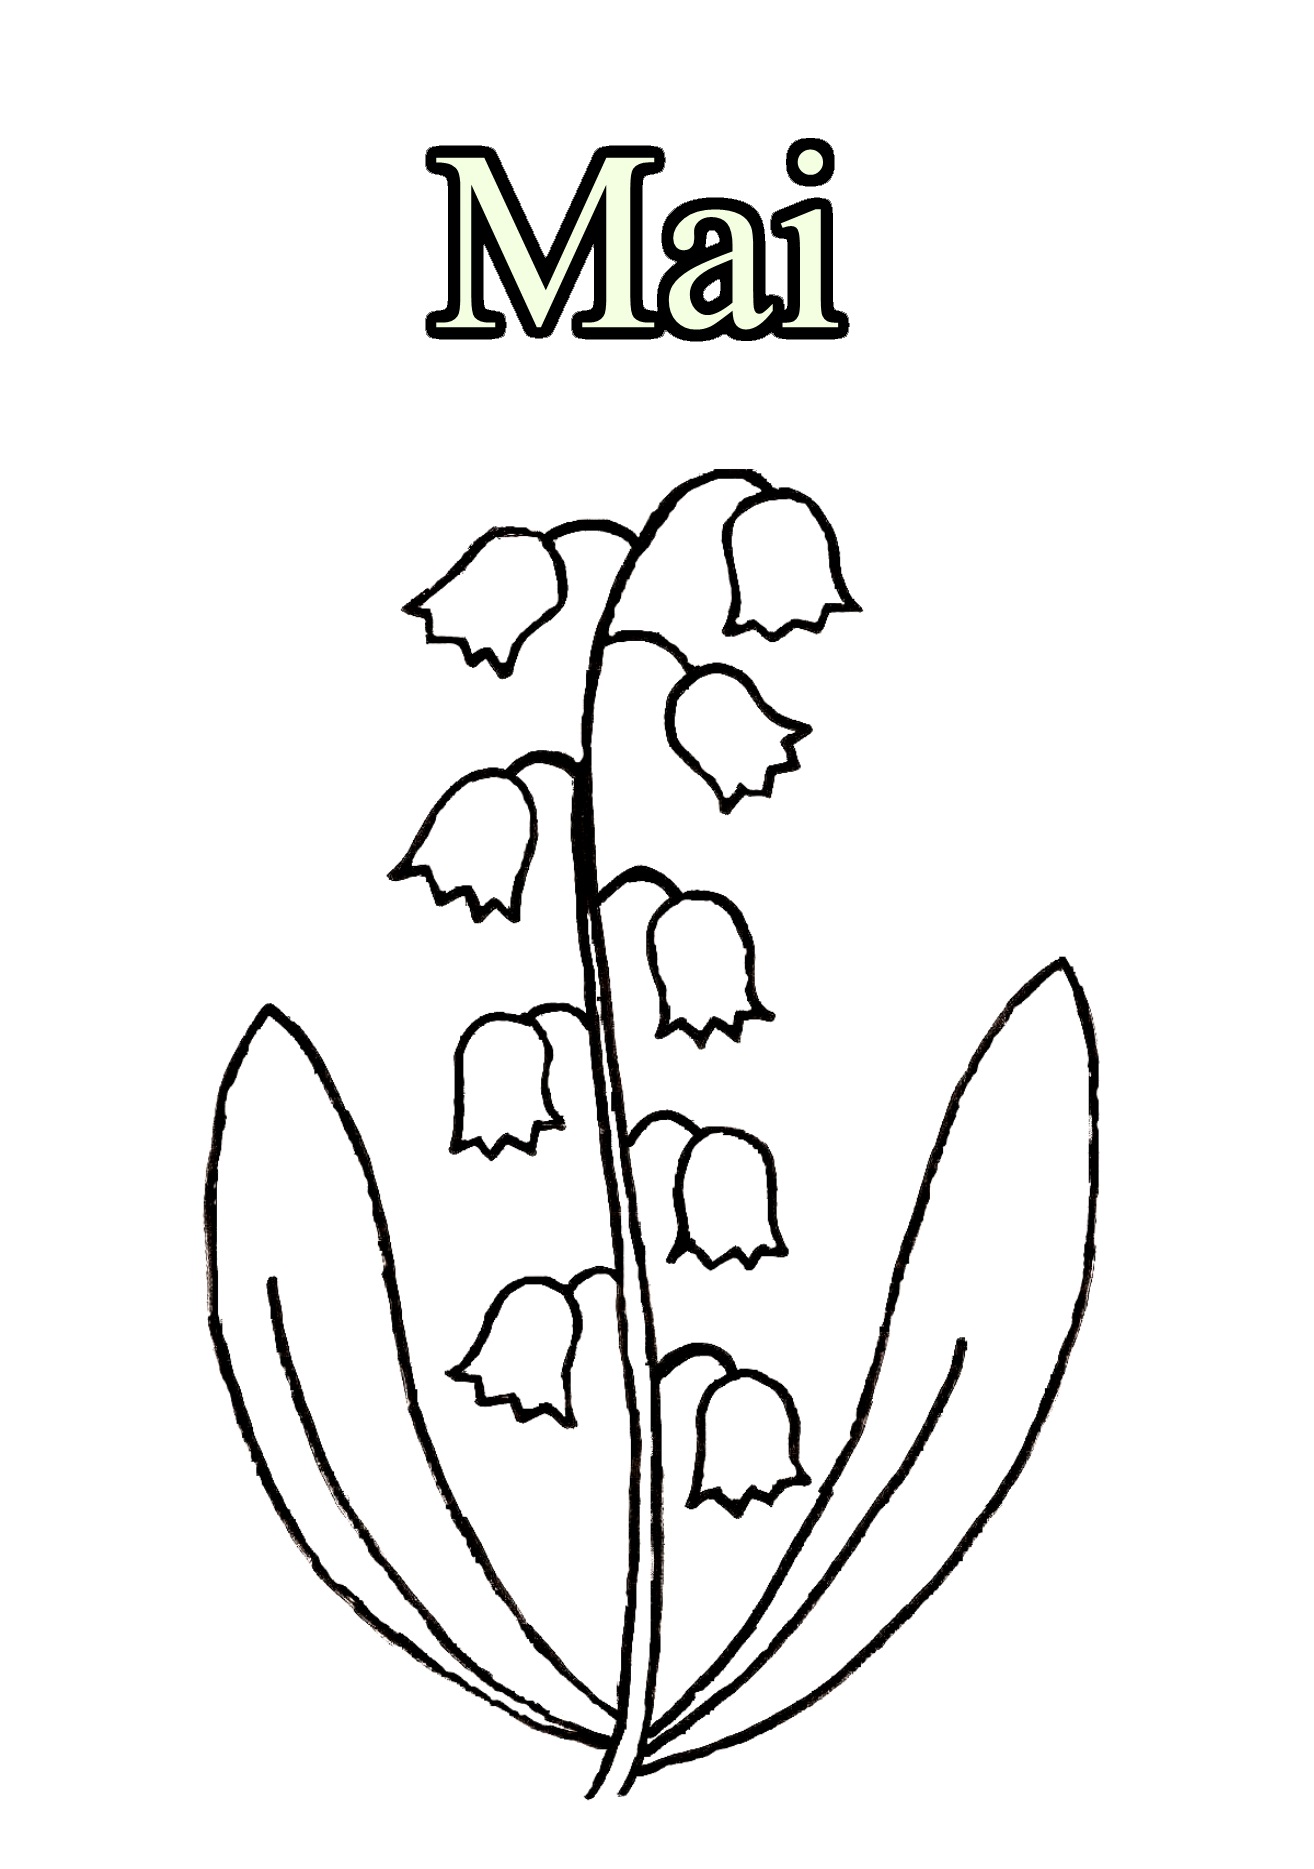 Month to color for children - Month Kids Coloring Pages